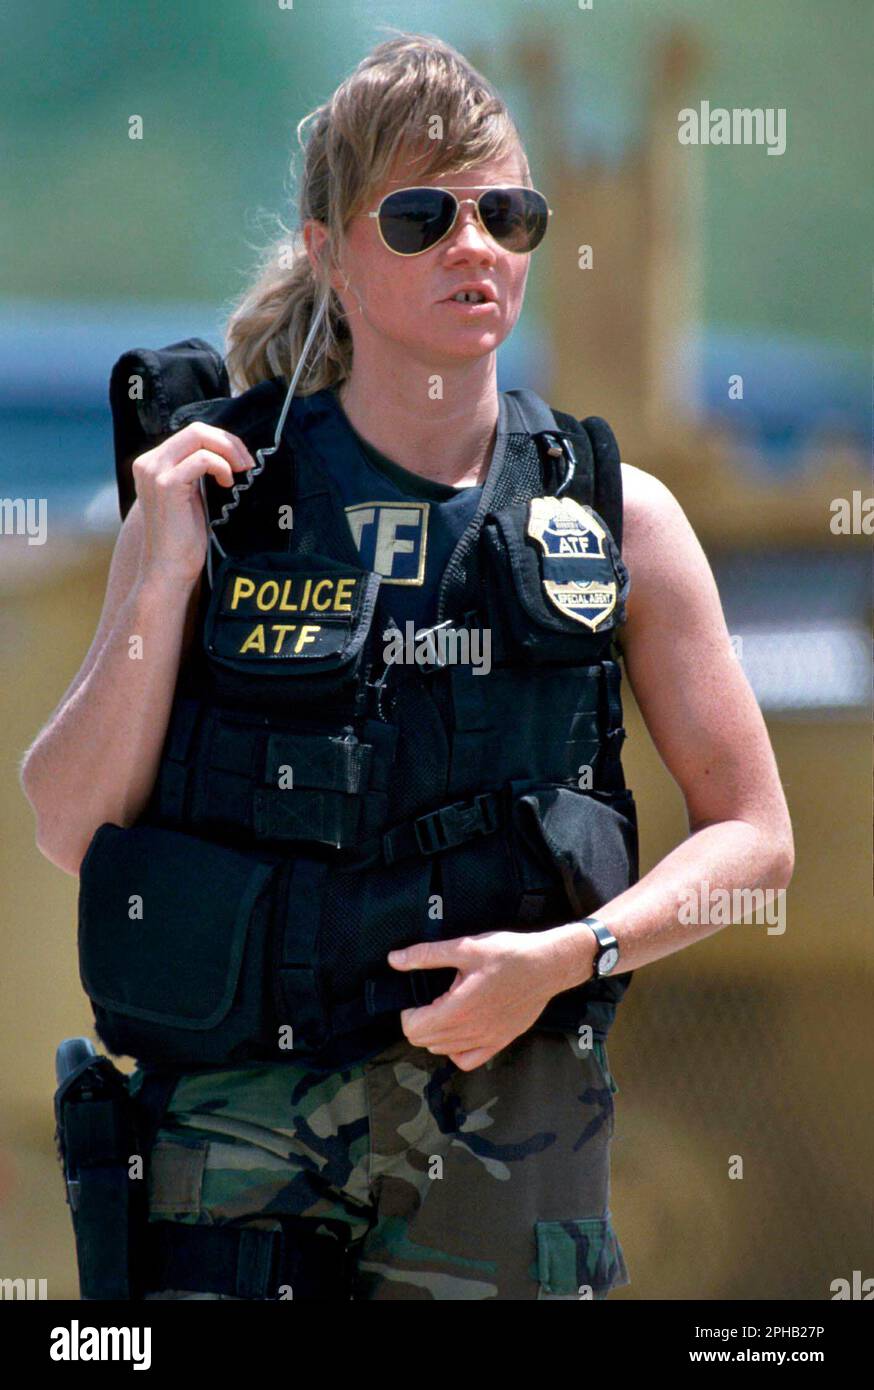 Waco, Texas USA, April 1993: Female agent in the Bureau of Alcohol, Tobacco and Firearms (ATF) wears a bulletproof vest and a communications earpiece is ready for action during the standoff between law enforcement agencies and the Branch Davidian religions group. ©Bob Daemmrich Stock Photo